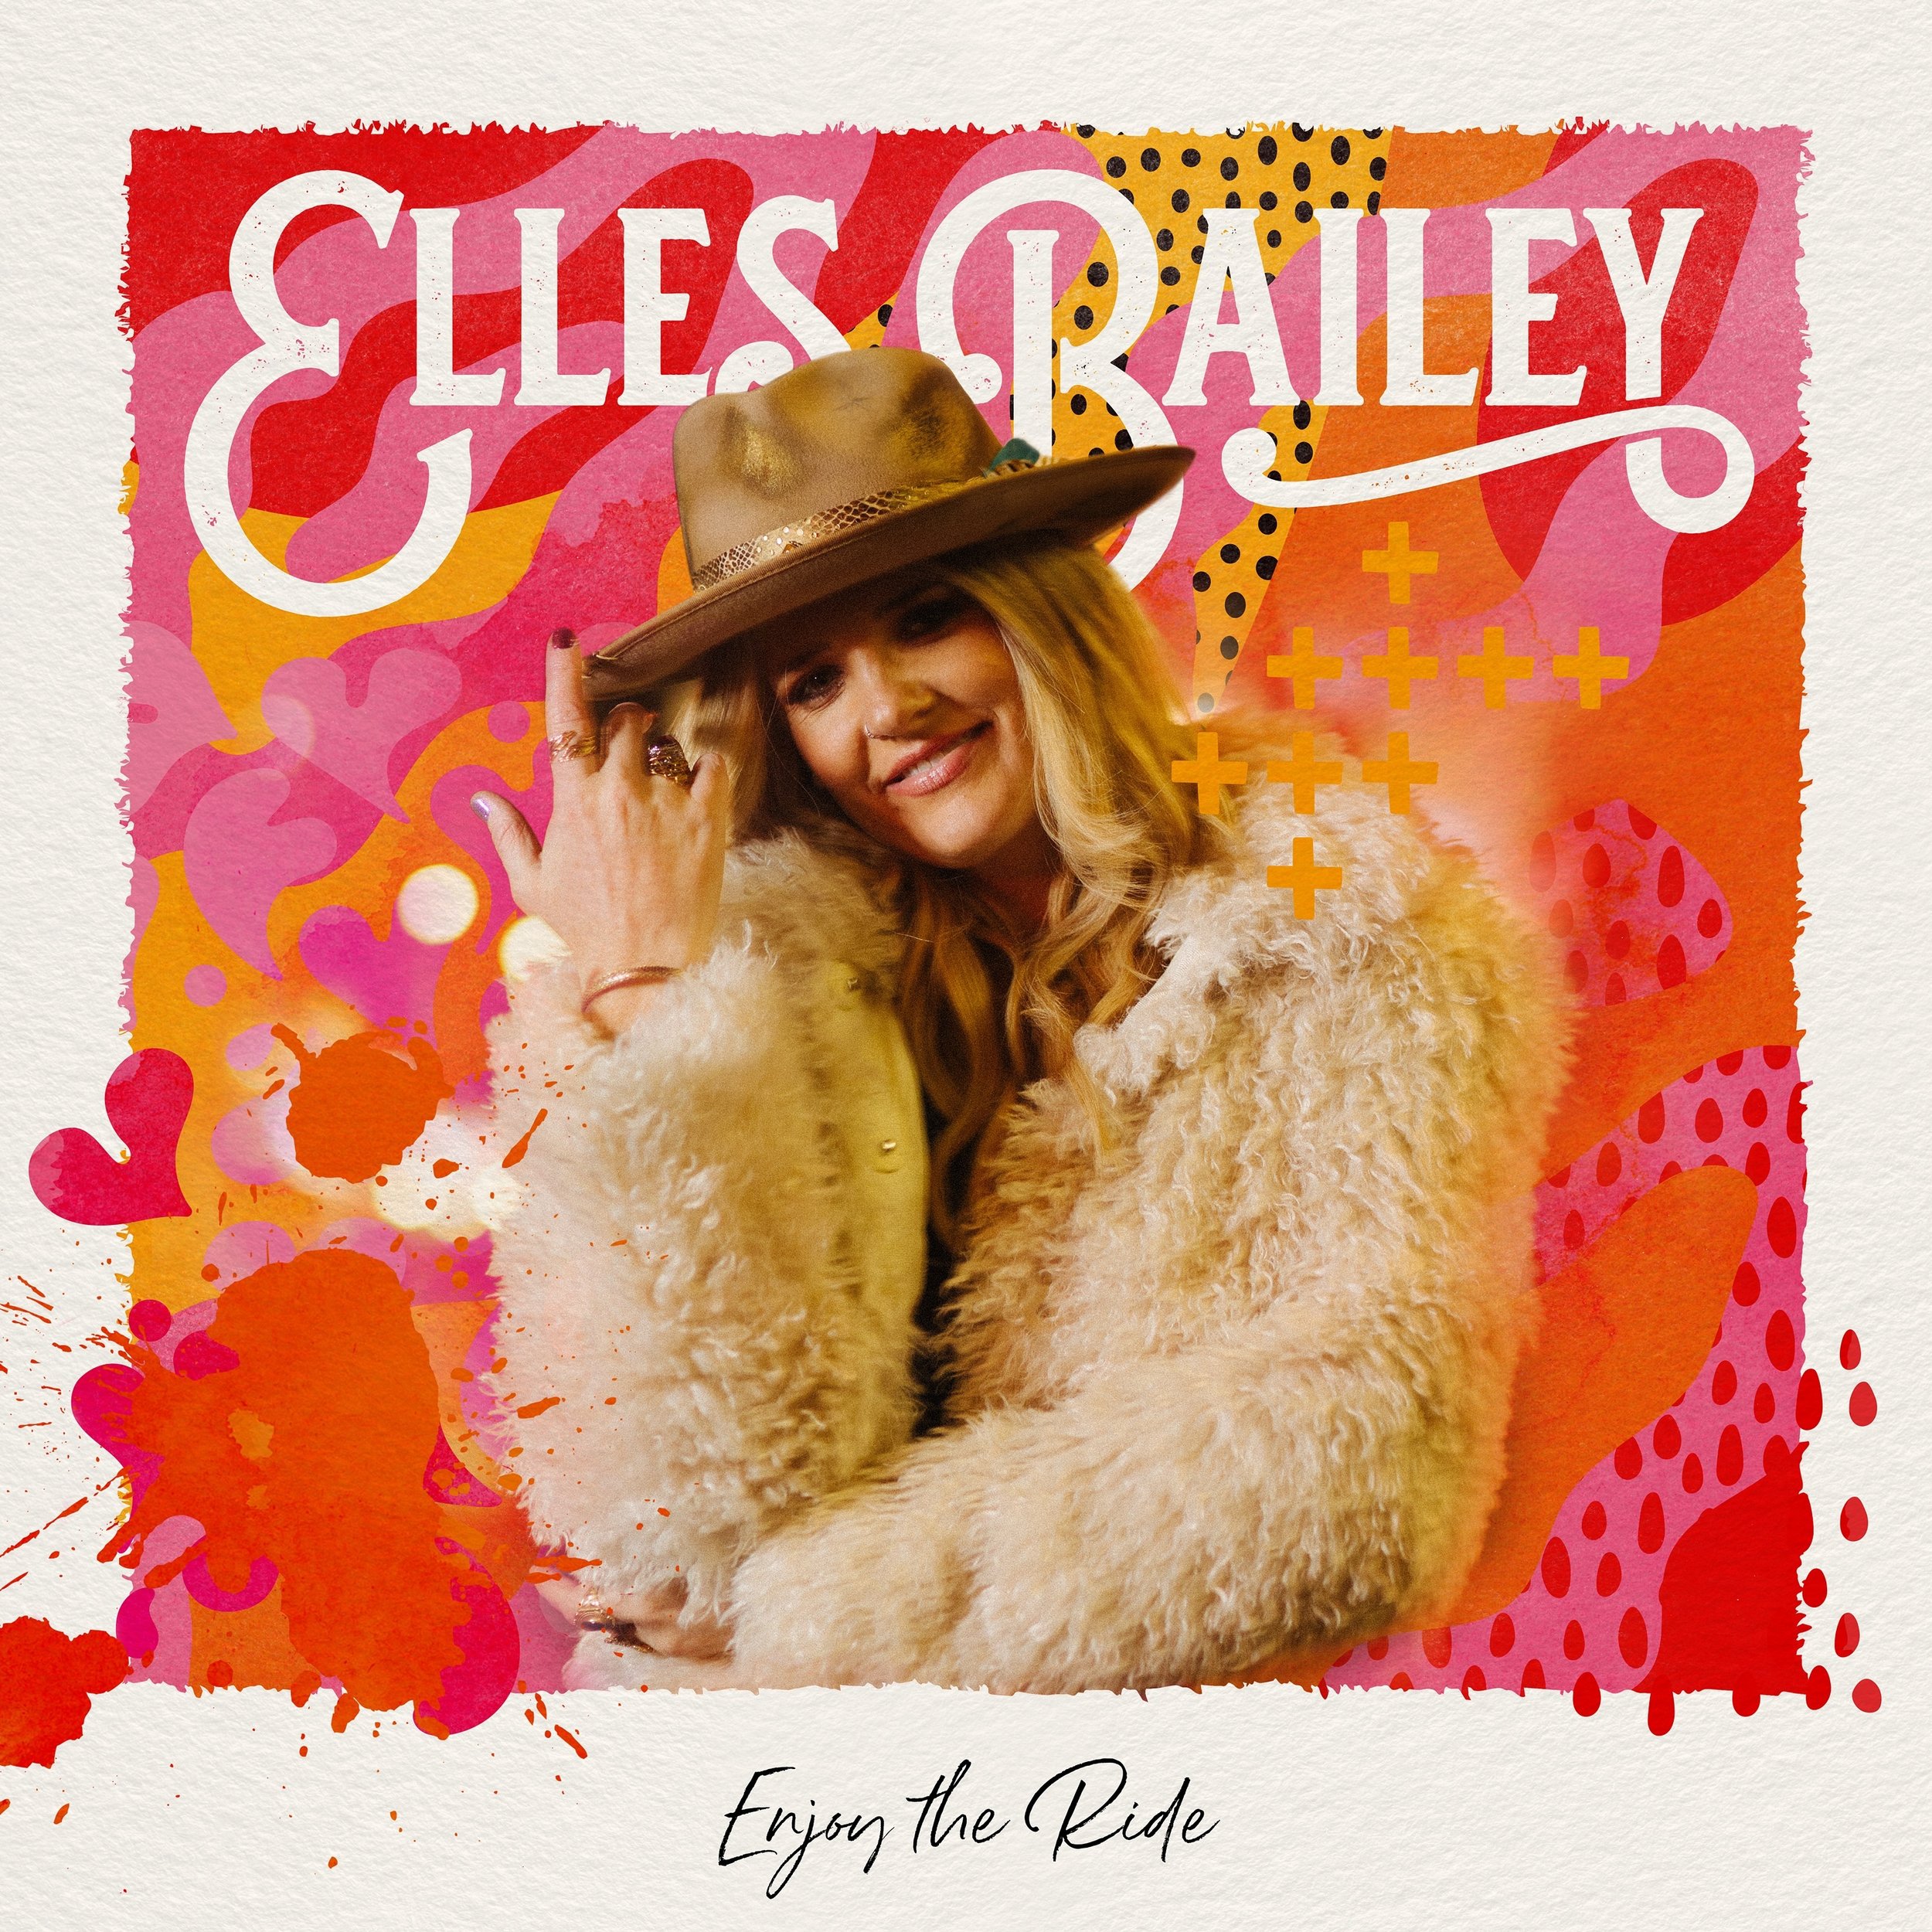 The multi-talented @ellesbailey has released her first single &lsquo;Enjoy the Ride&rsquo; taken from upcoming album &lsquo;Beneath the Neon Glow&rsquo;, out September 8th 🔥🤠

Click the link in her bio to listen to the track and pre-order the album